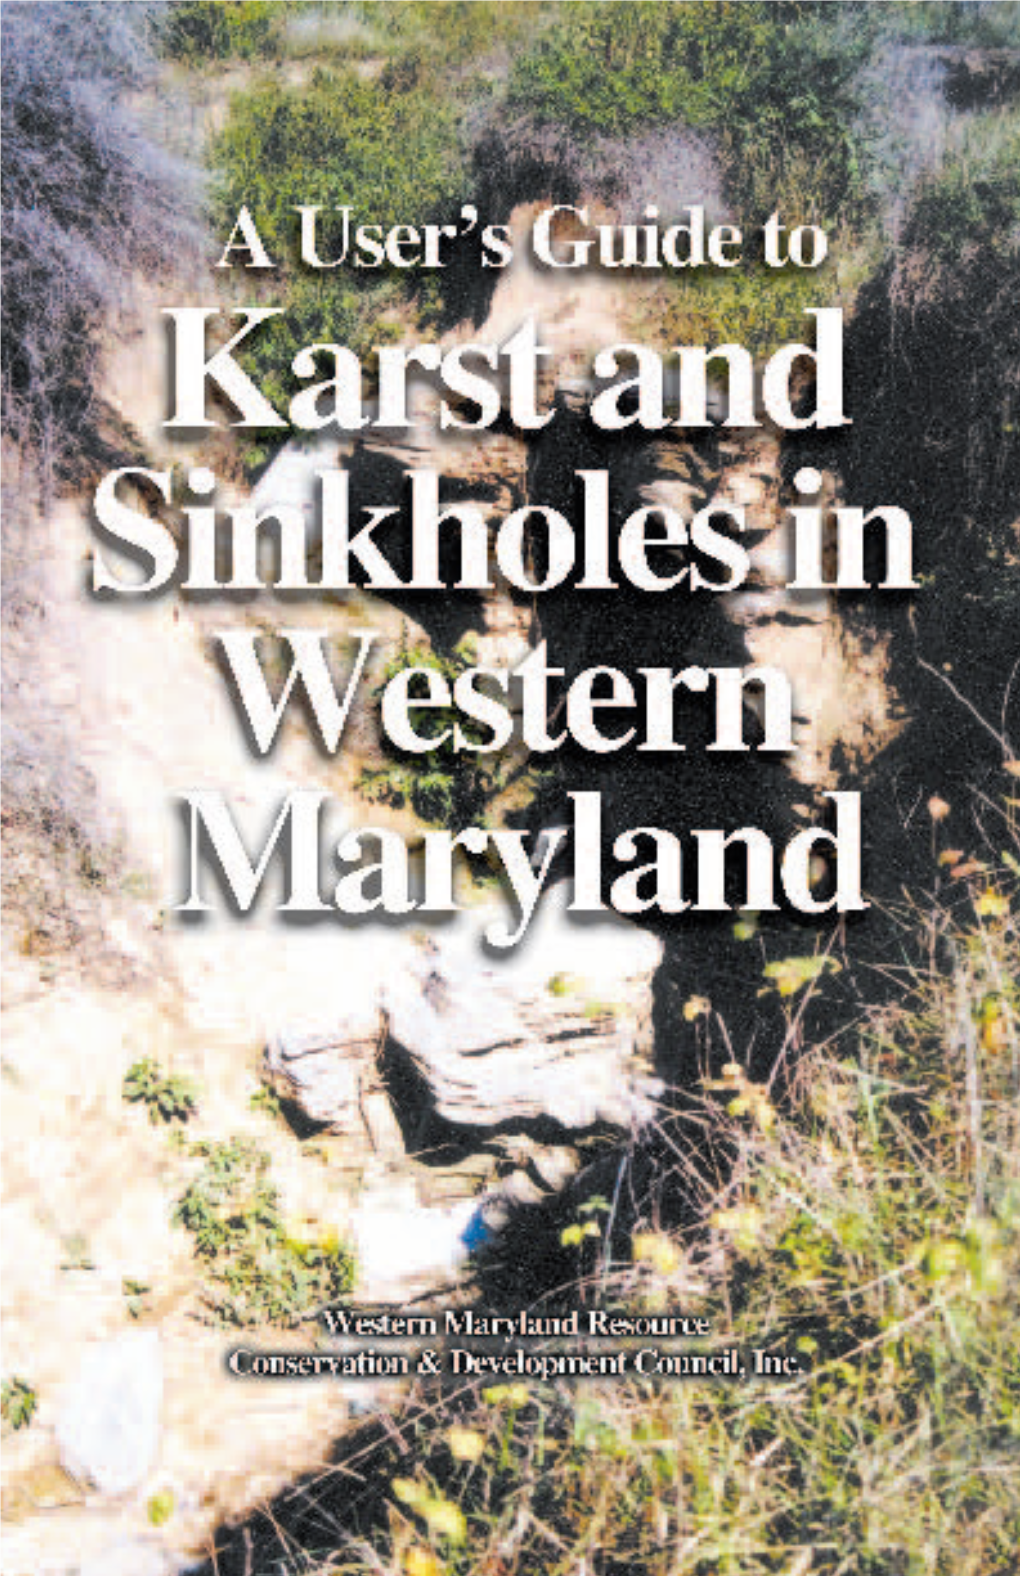 A User's Guide to Karst and Sinkholes In